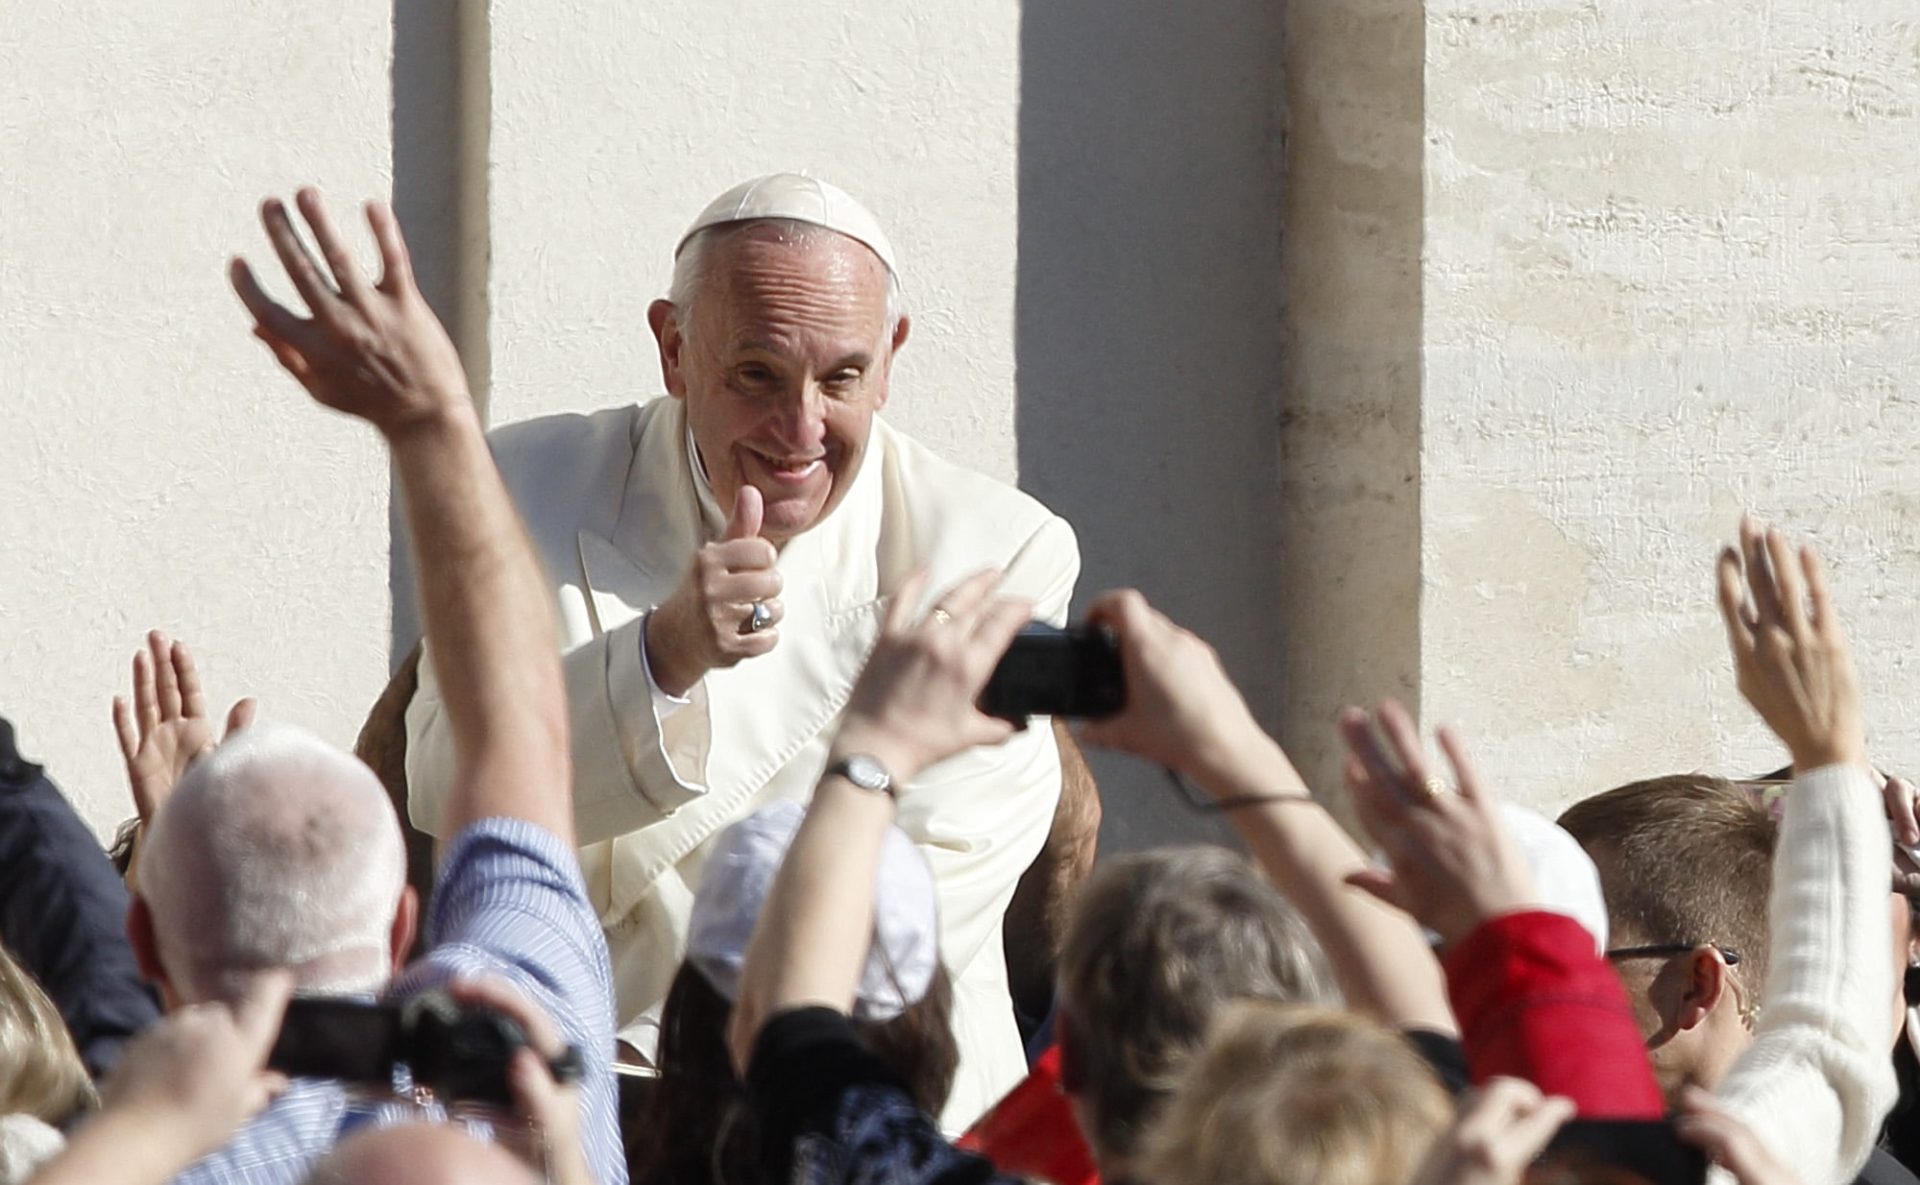 Pope Francis gives a thumbs up as he greets the crowd during his general audience in St. Peter's Square at the Vatican on 2 March. Photo:  CNS/Paul Haring